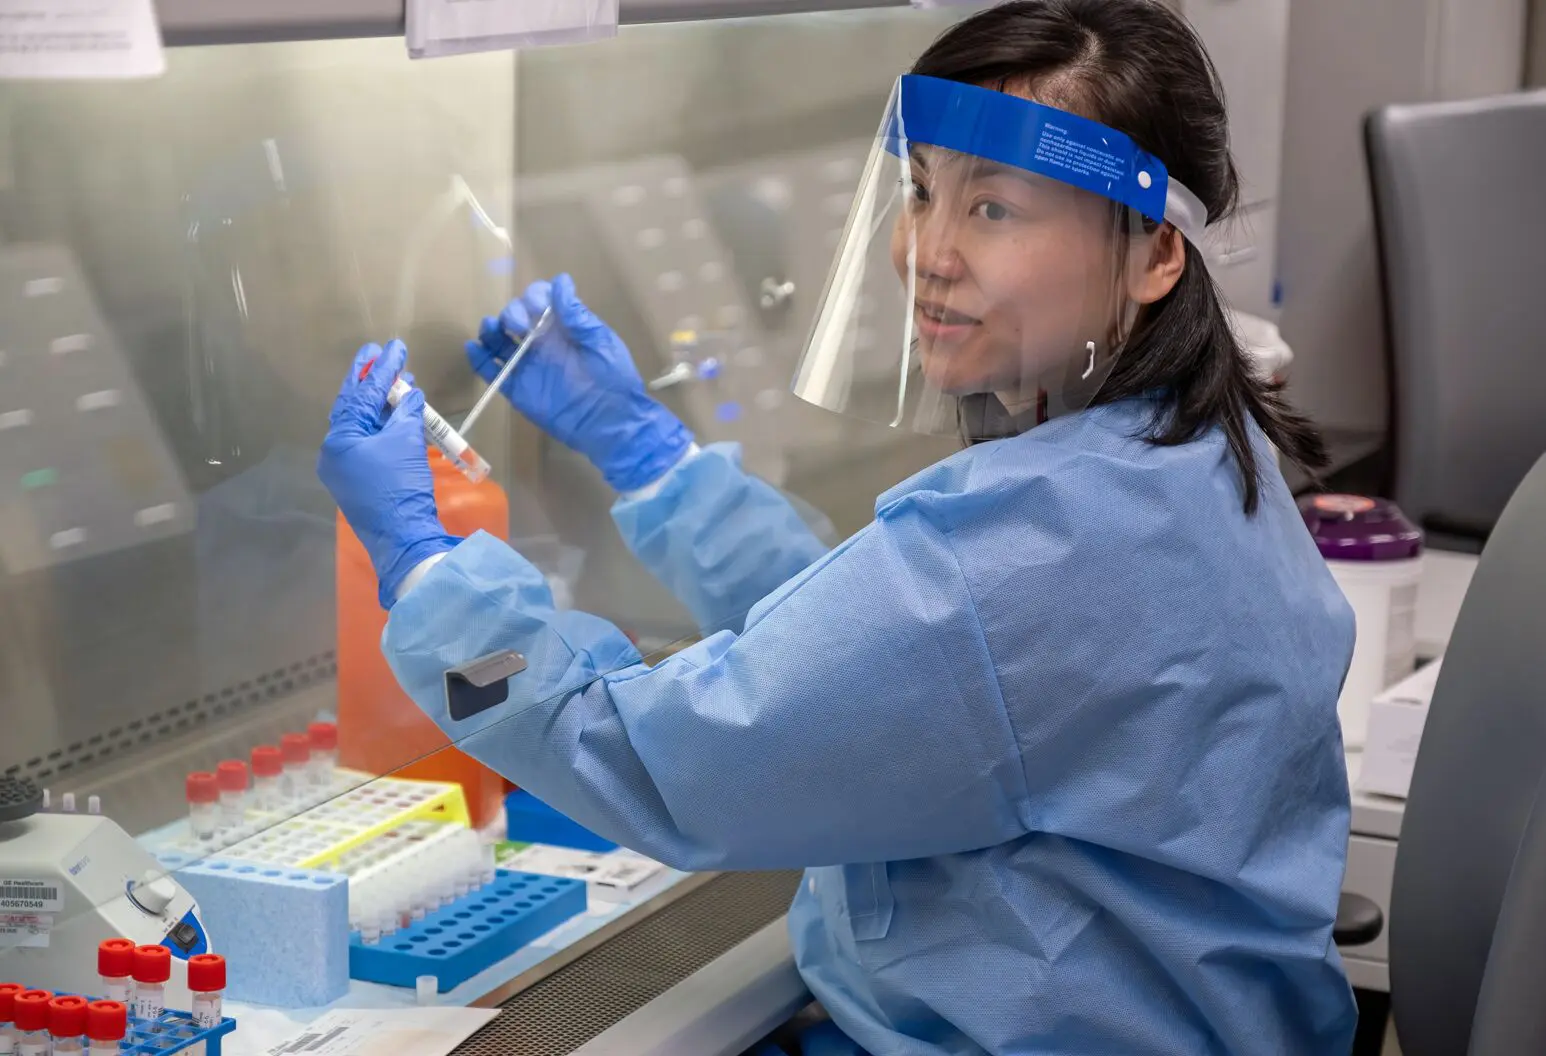 A woman in blue lab coat and gloves working with a test tube.